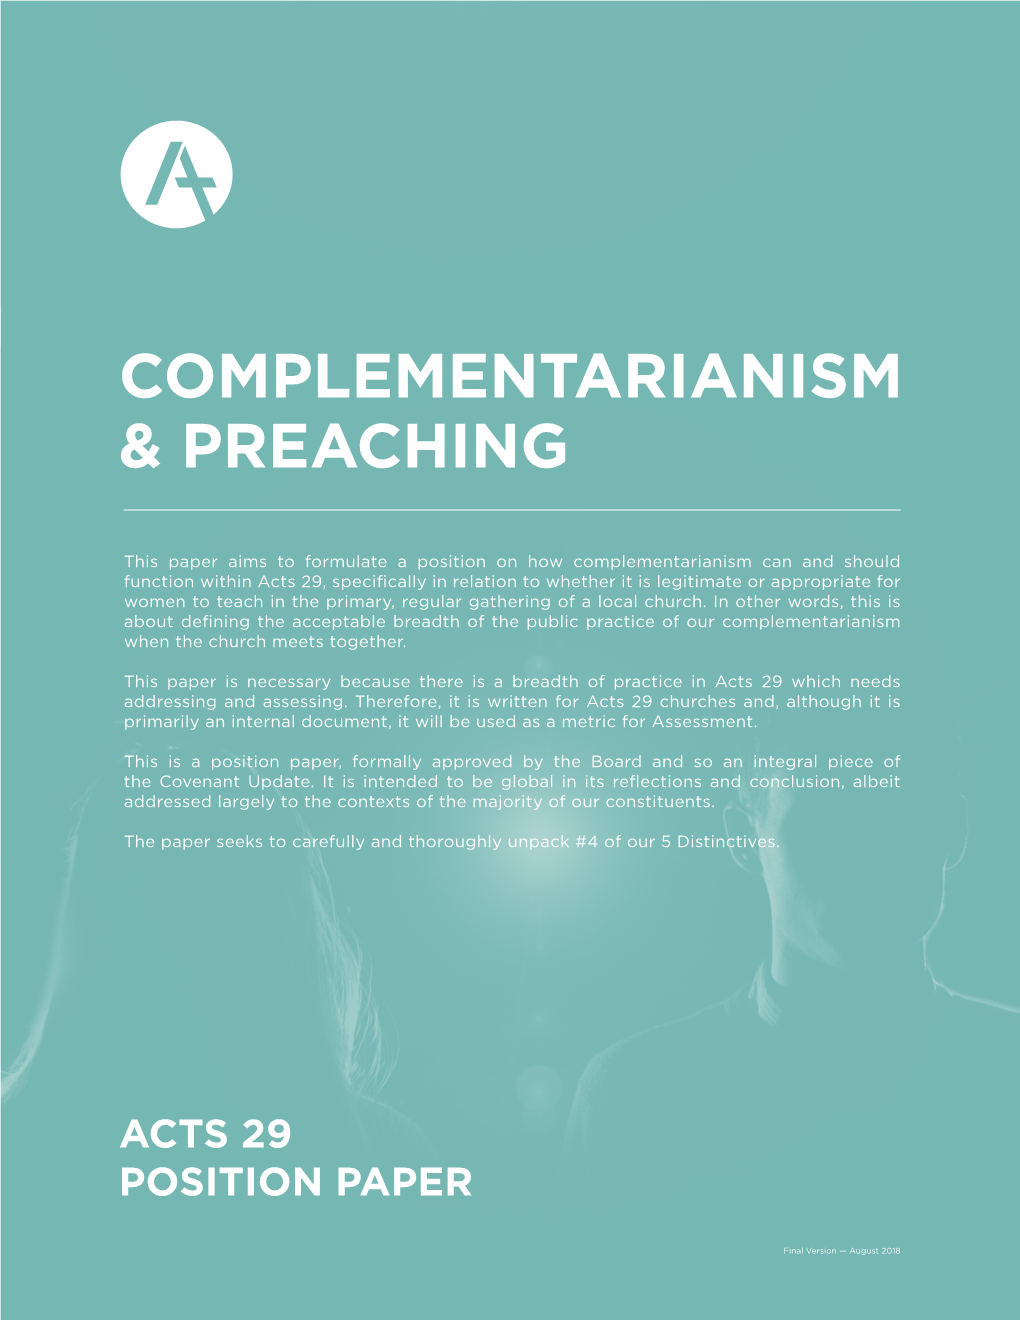 Complementarianism & Preaching